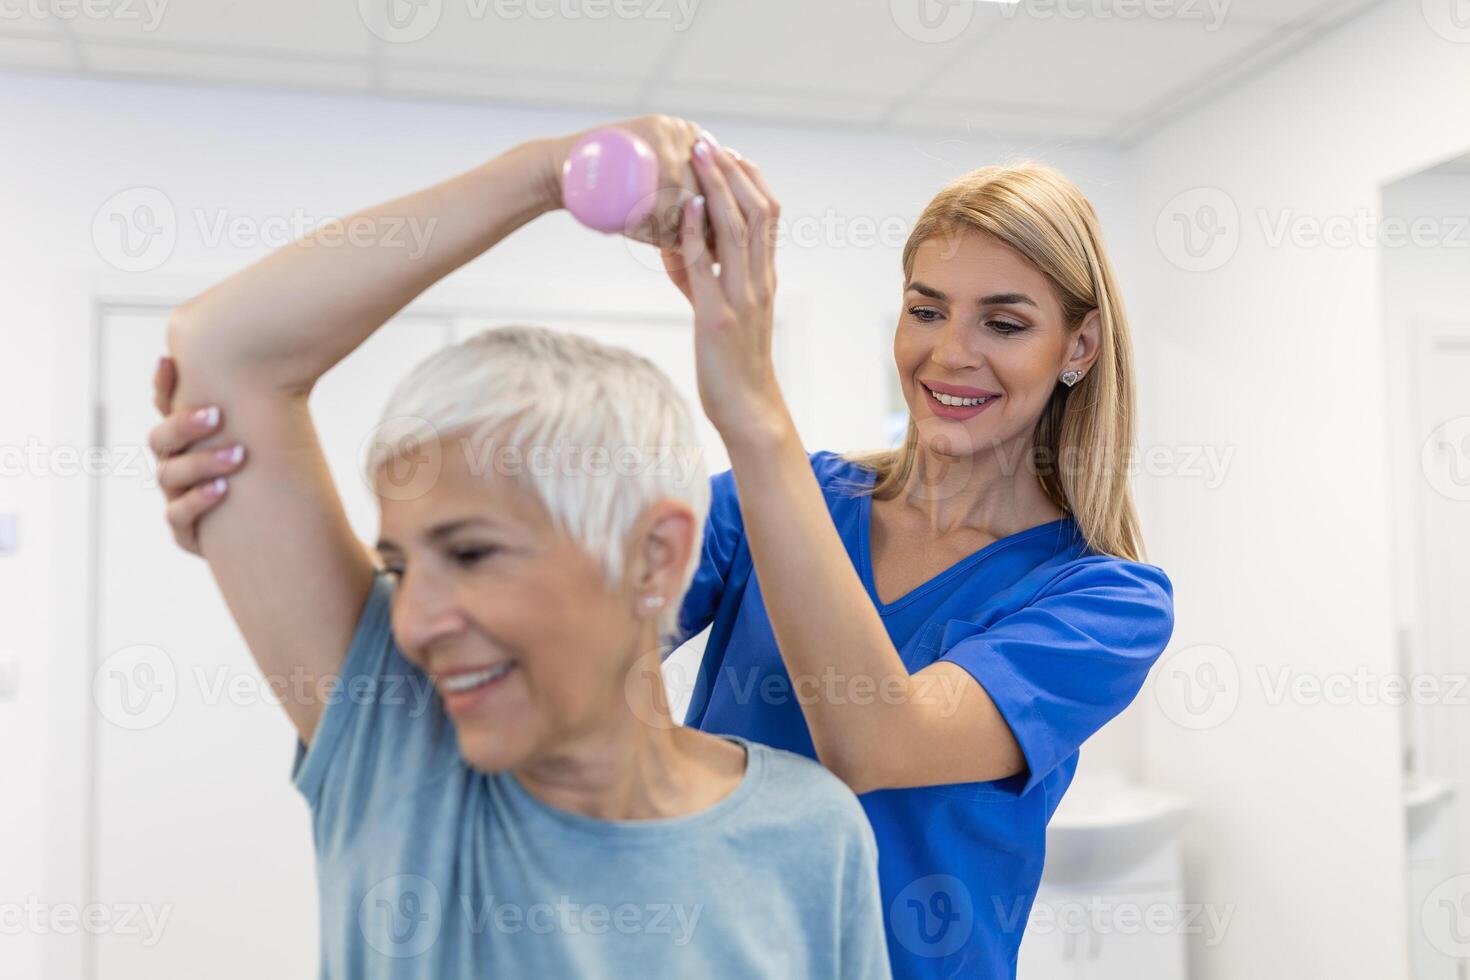 Physiotherapist woman giving exercise with dumbbell treatment About Arm and Shoulder of senior female patient Physical therapy concept photo